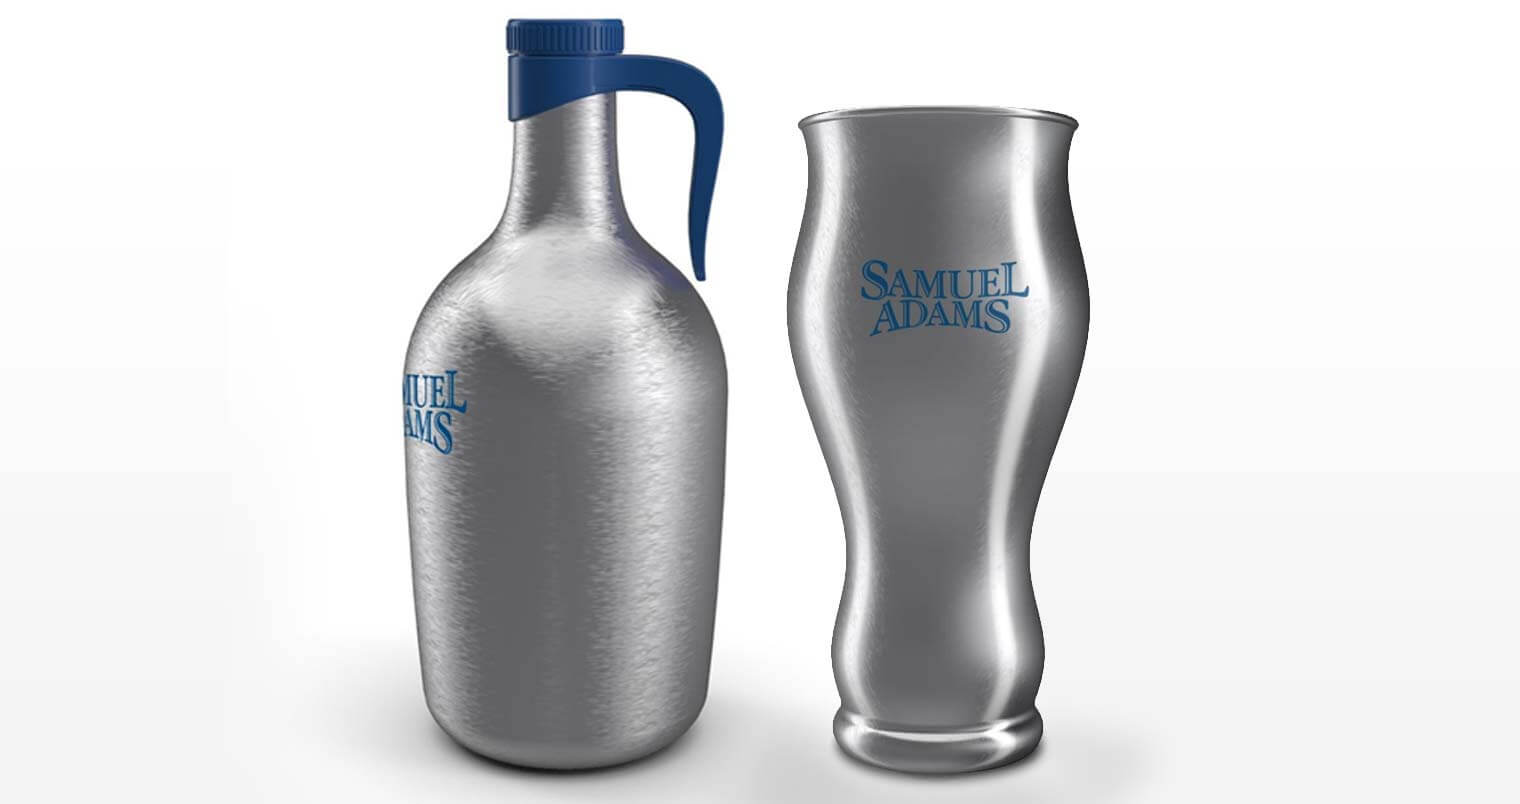 Stainless Steel Beer Growler and Sam Adams Perfect Pint